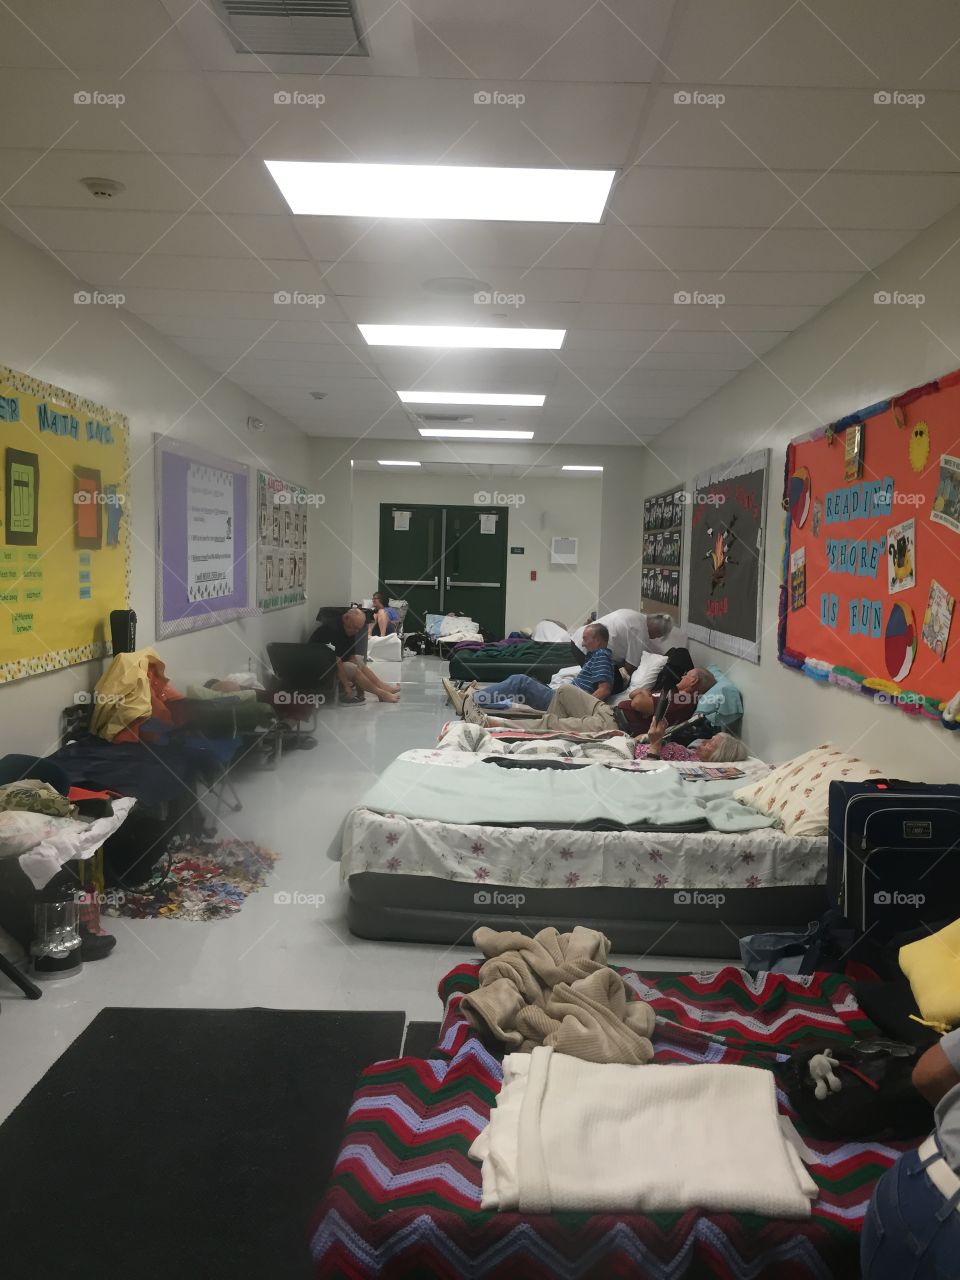 Bunnell elementary school in Flagler Beach Florida was converted to an emergency shelter during hurricane Matthew